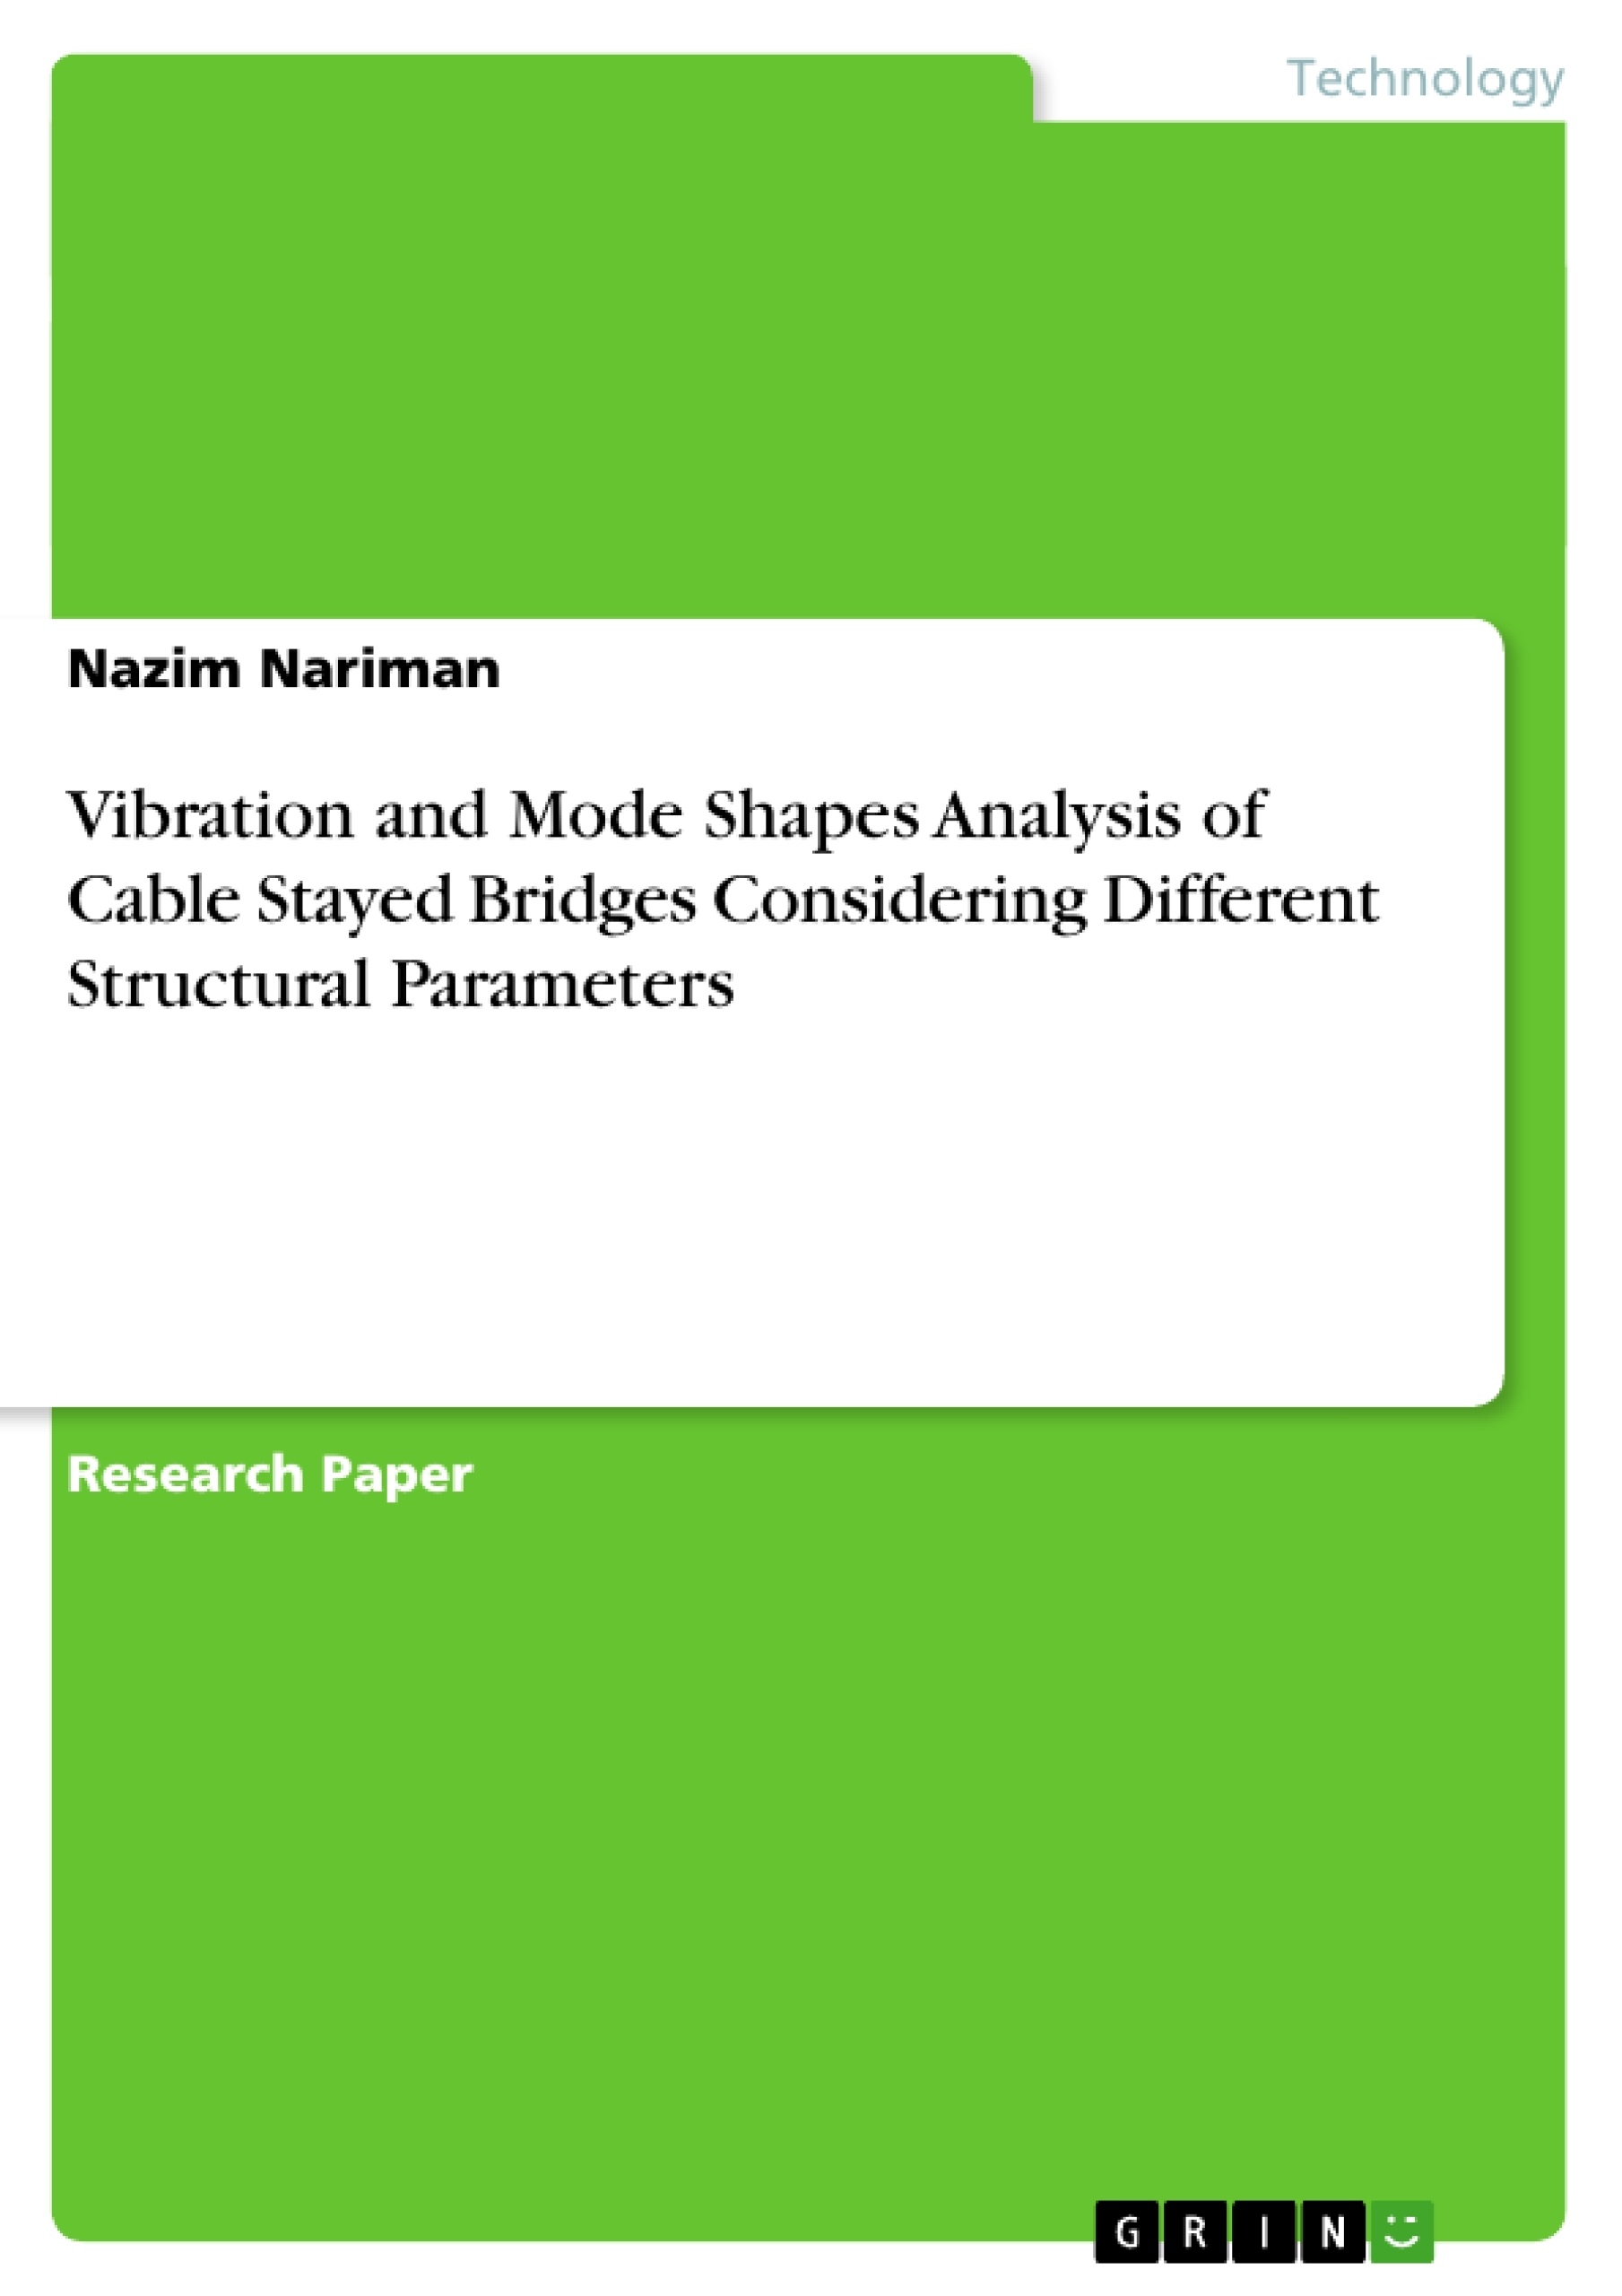 Title: Vibration and Mode Shapes Analysis of Cable Stayed Bridges Considering Different Structural Parameters